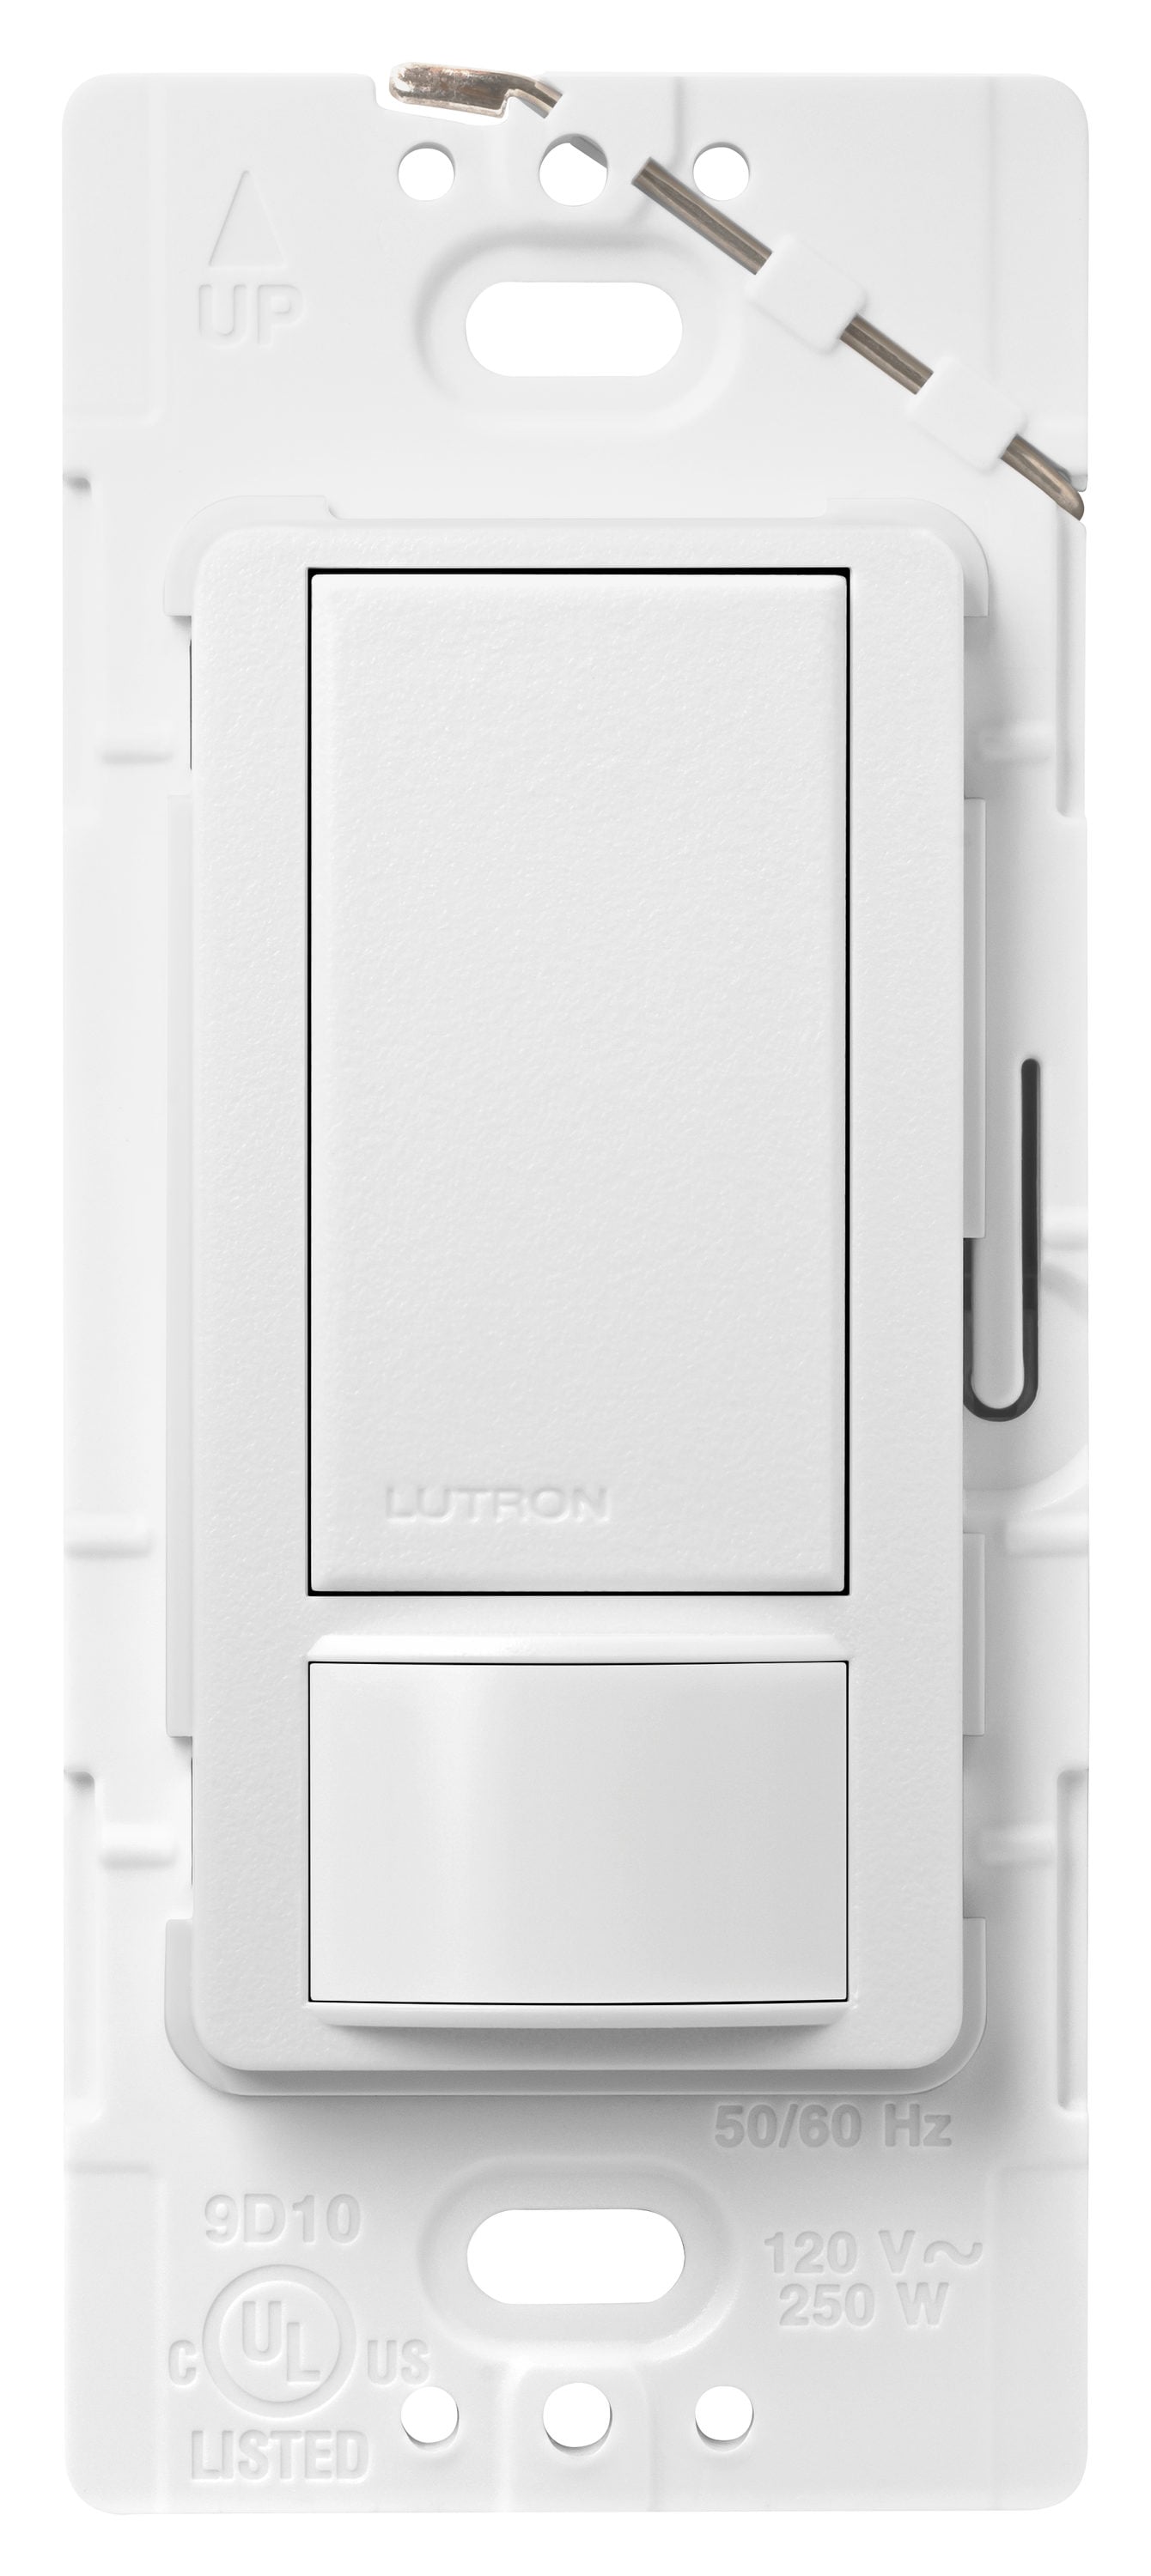 Lutron Electronics Ms-Ops2H-Wh Maestro Small Room Occupancy Sensor Switch White